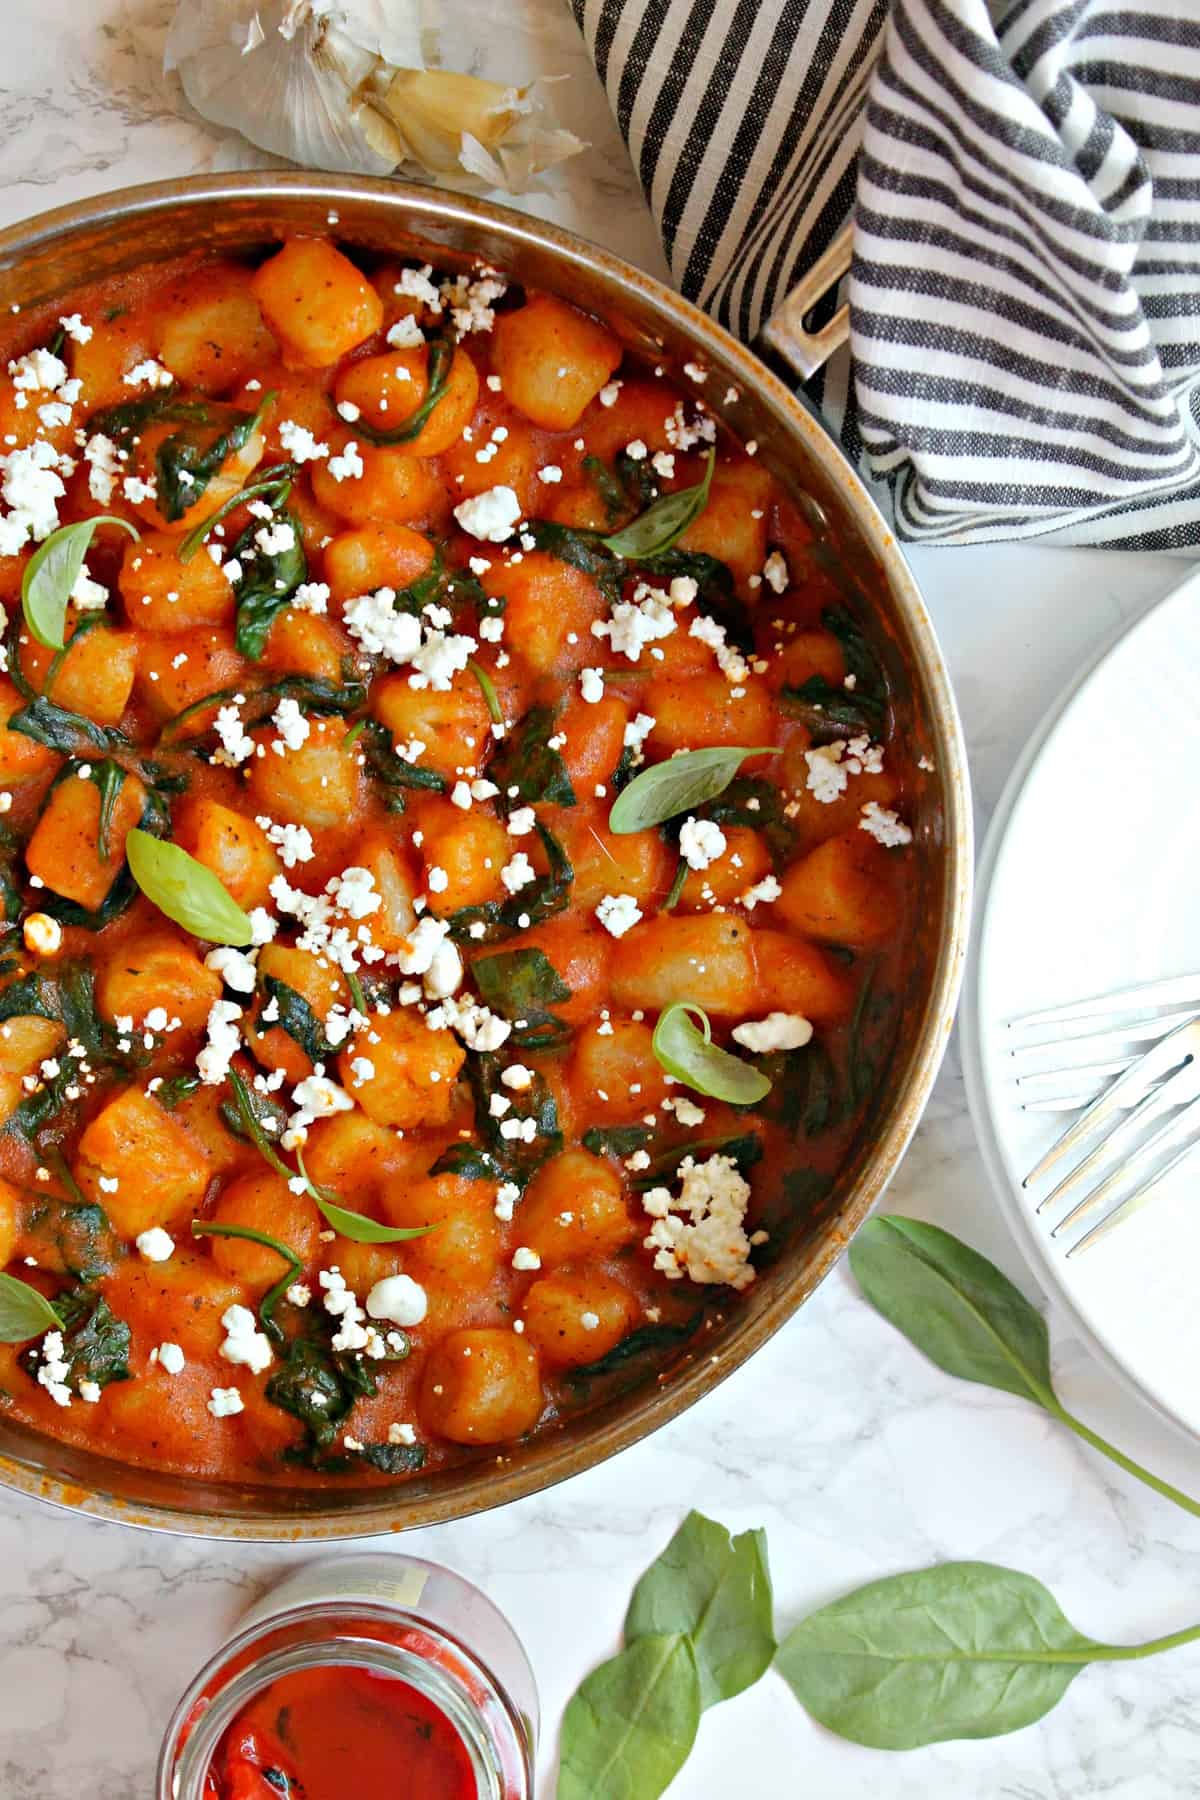 Easy Skillet Gnocchi in Roasted Red Pepper Sauce with Spinach & Goat Cheese! Busy weeknights are no reason to settle for subpar meals! Using just a handful of items from Trader Joe's {substitutions included for those of you without TJ's}, you can make this satisfying comfort food dish! 